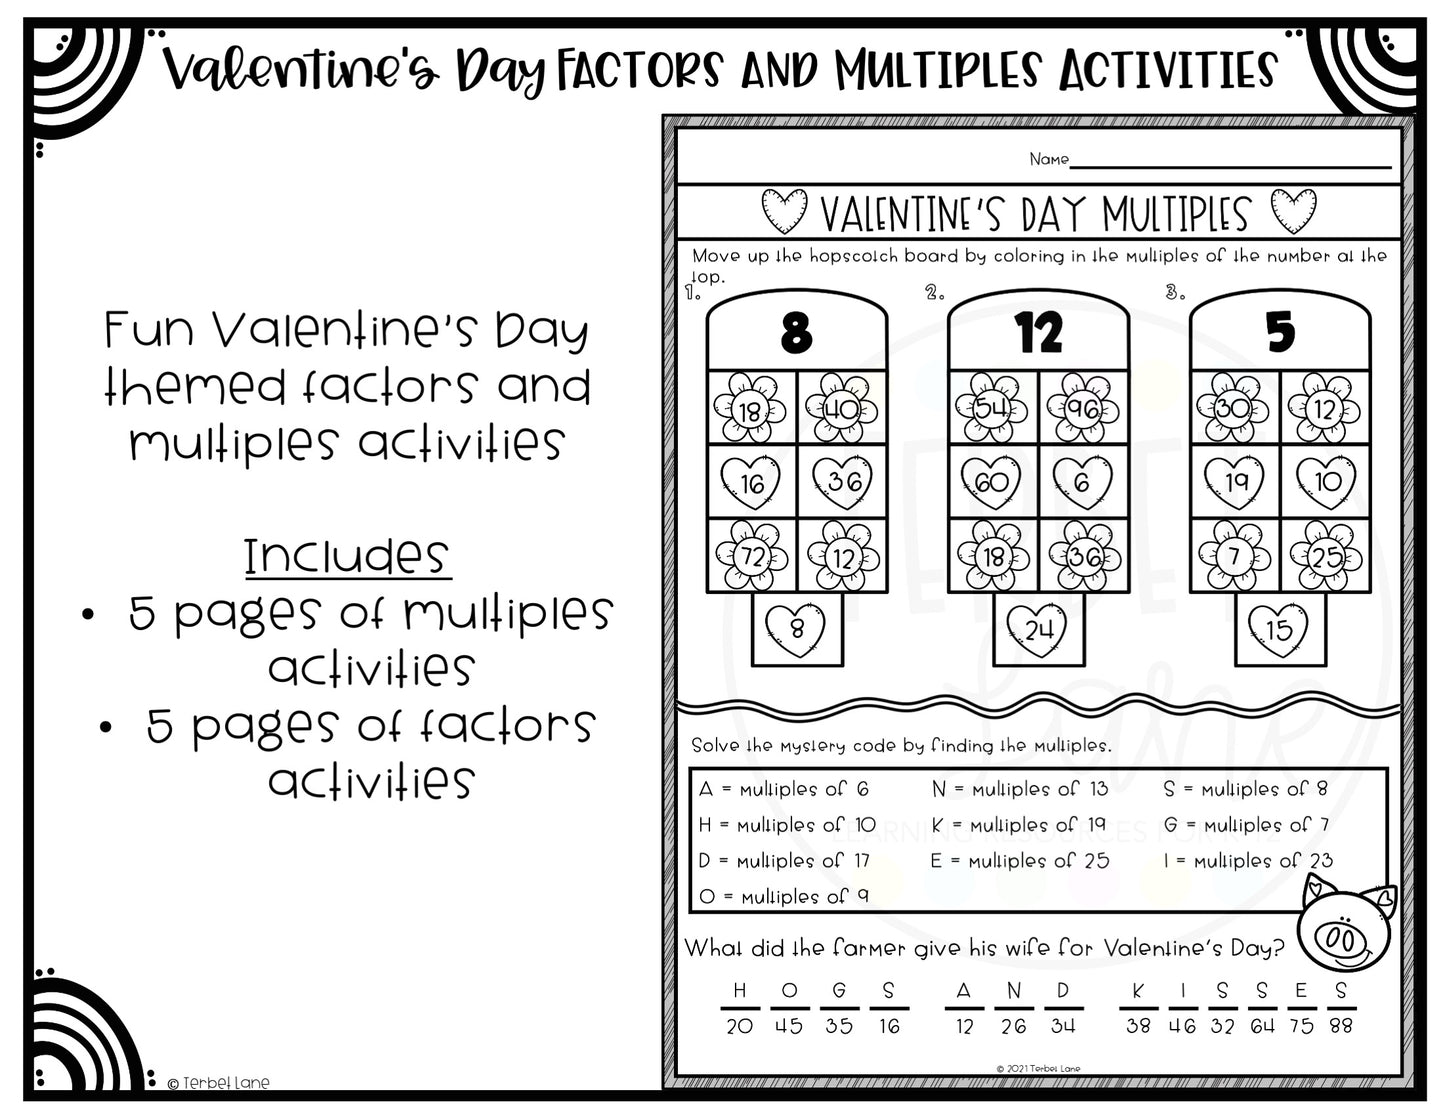 Valentine's Day Factors and Multiples Math Worksheets & Activities